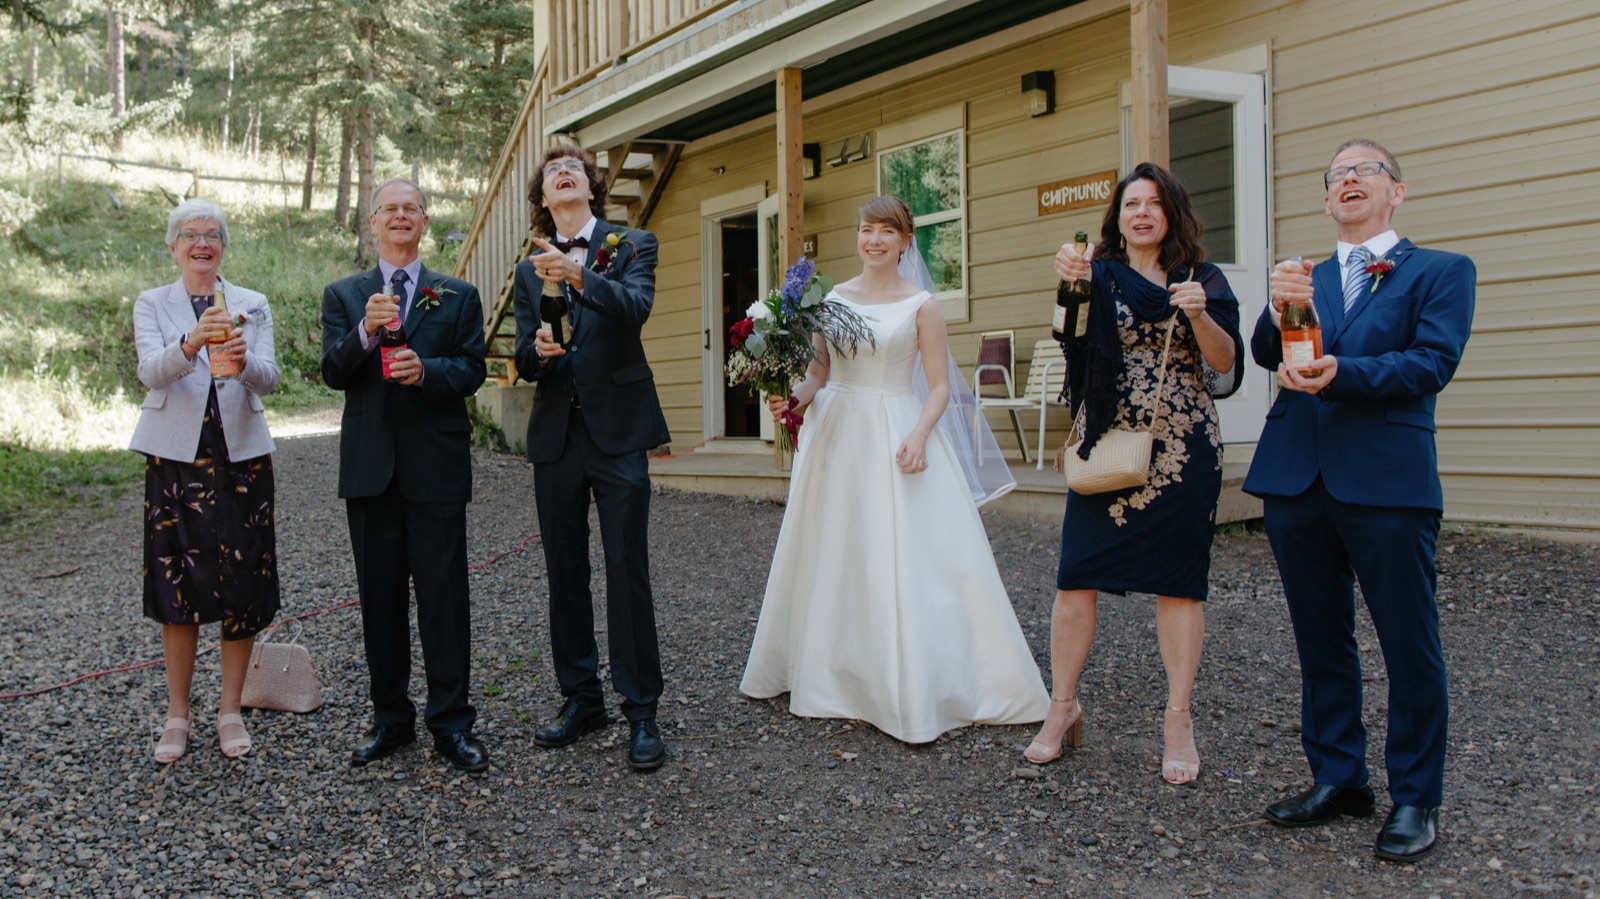 Wedding couple popping champagne with their parents during the receiving line